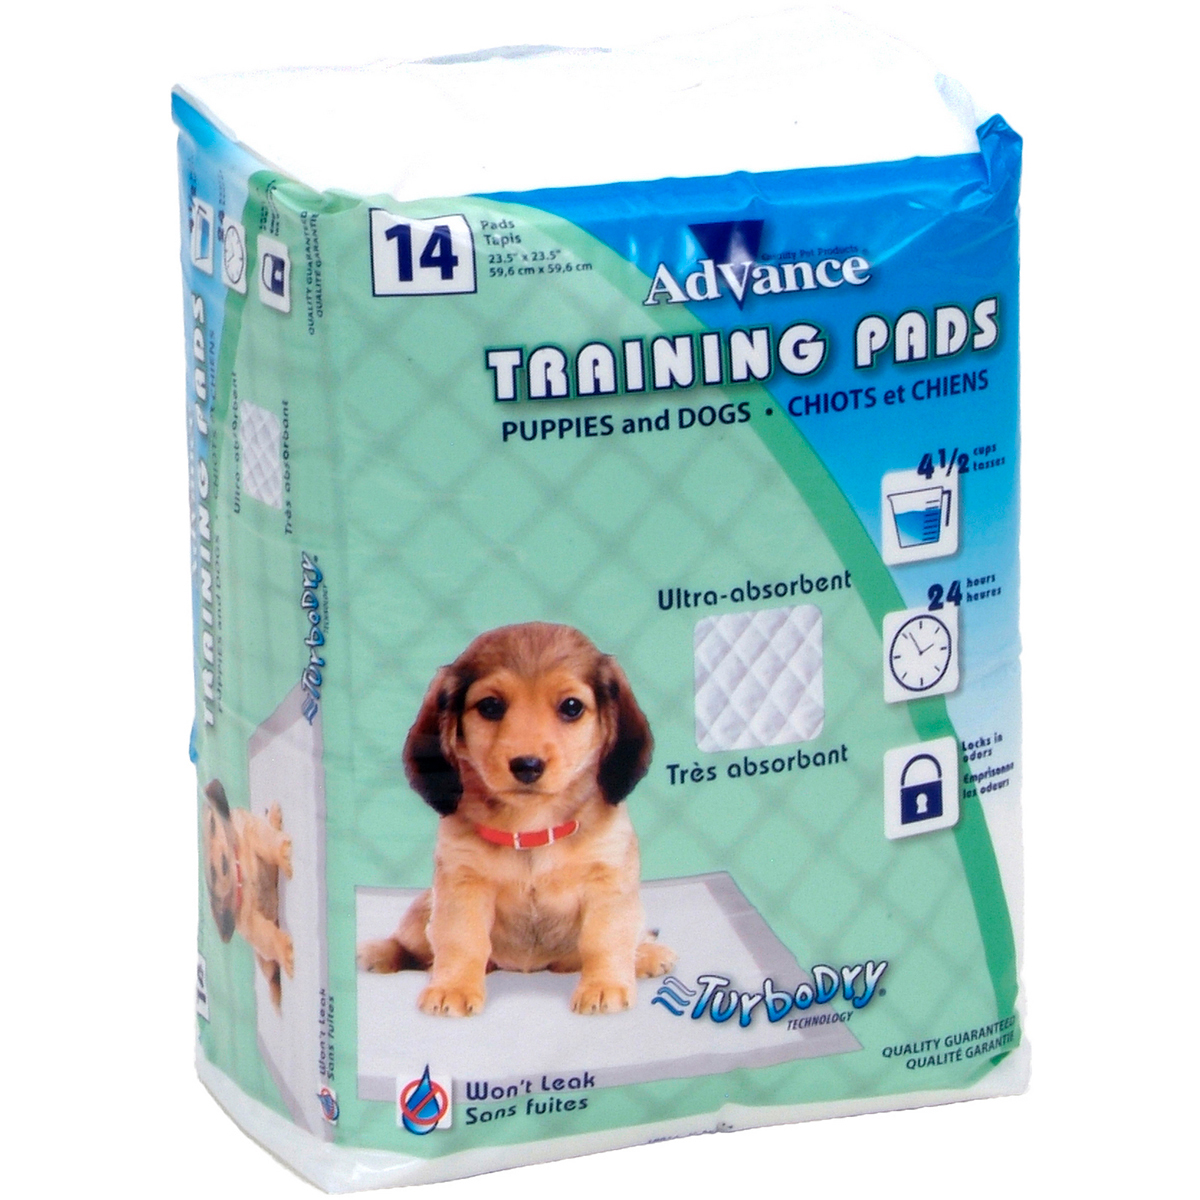 18814 Advance Dog Training Pads With Turbo Dry Technology, Pack Of 14 Pads